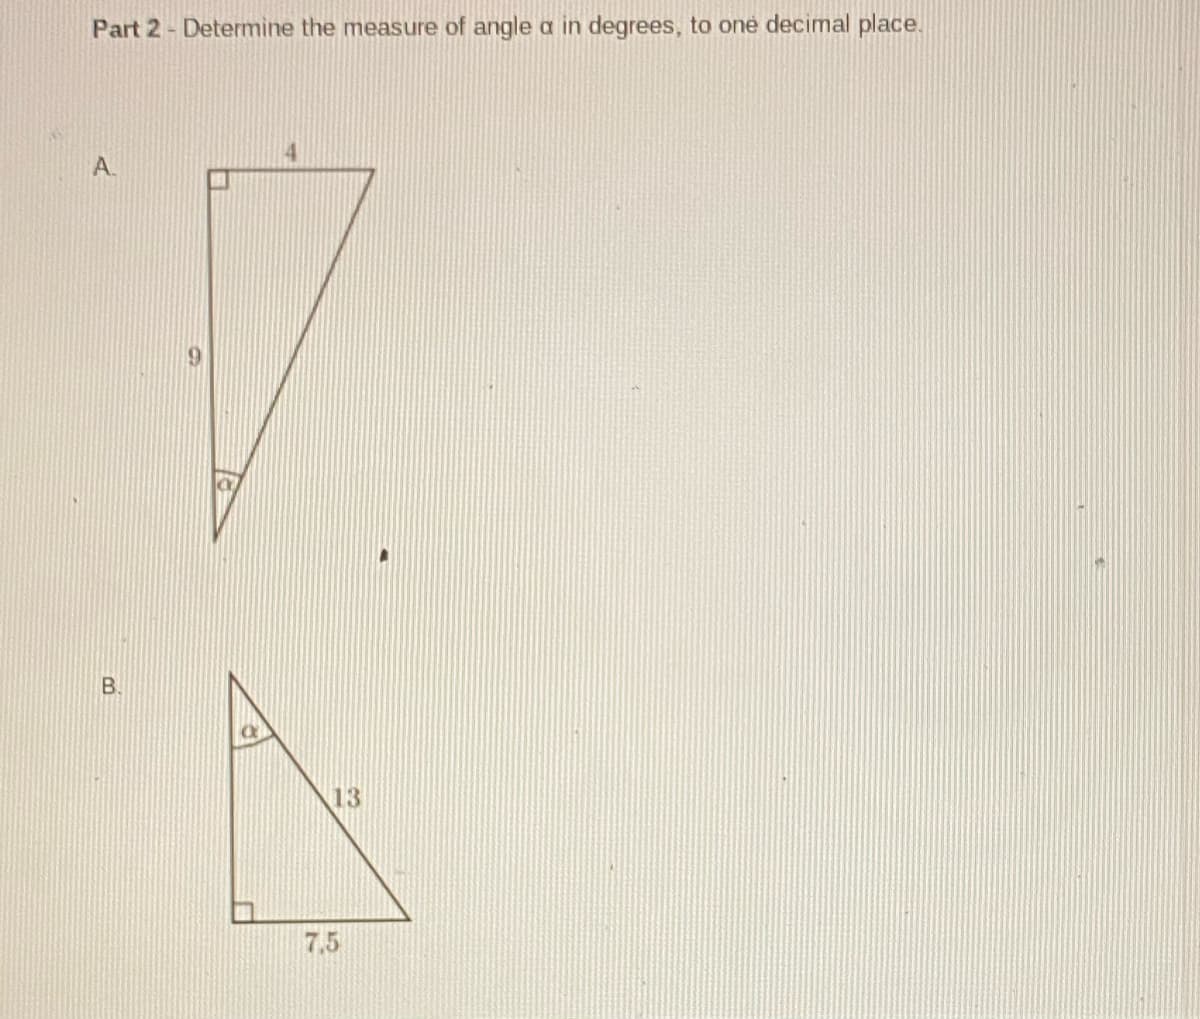 Part 2- Determine the measure of angle a in degrees, to one decimal place.
A.
B.
13
7.5
